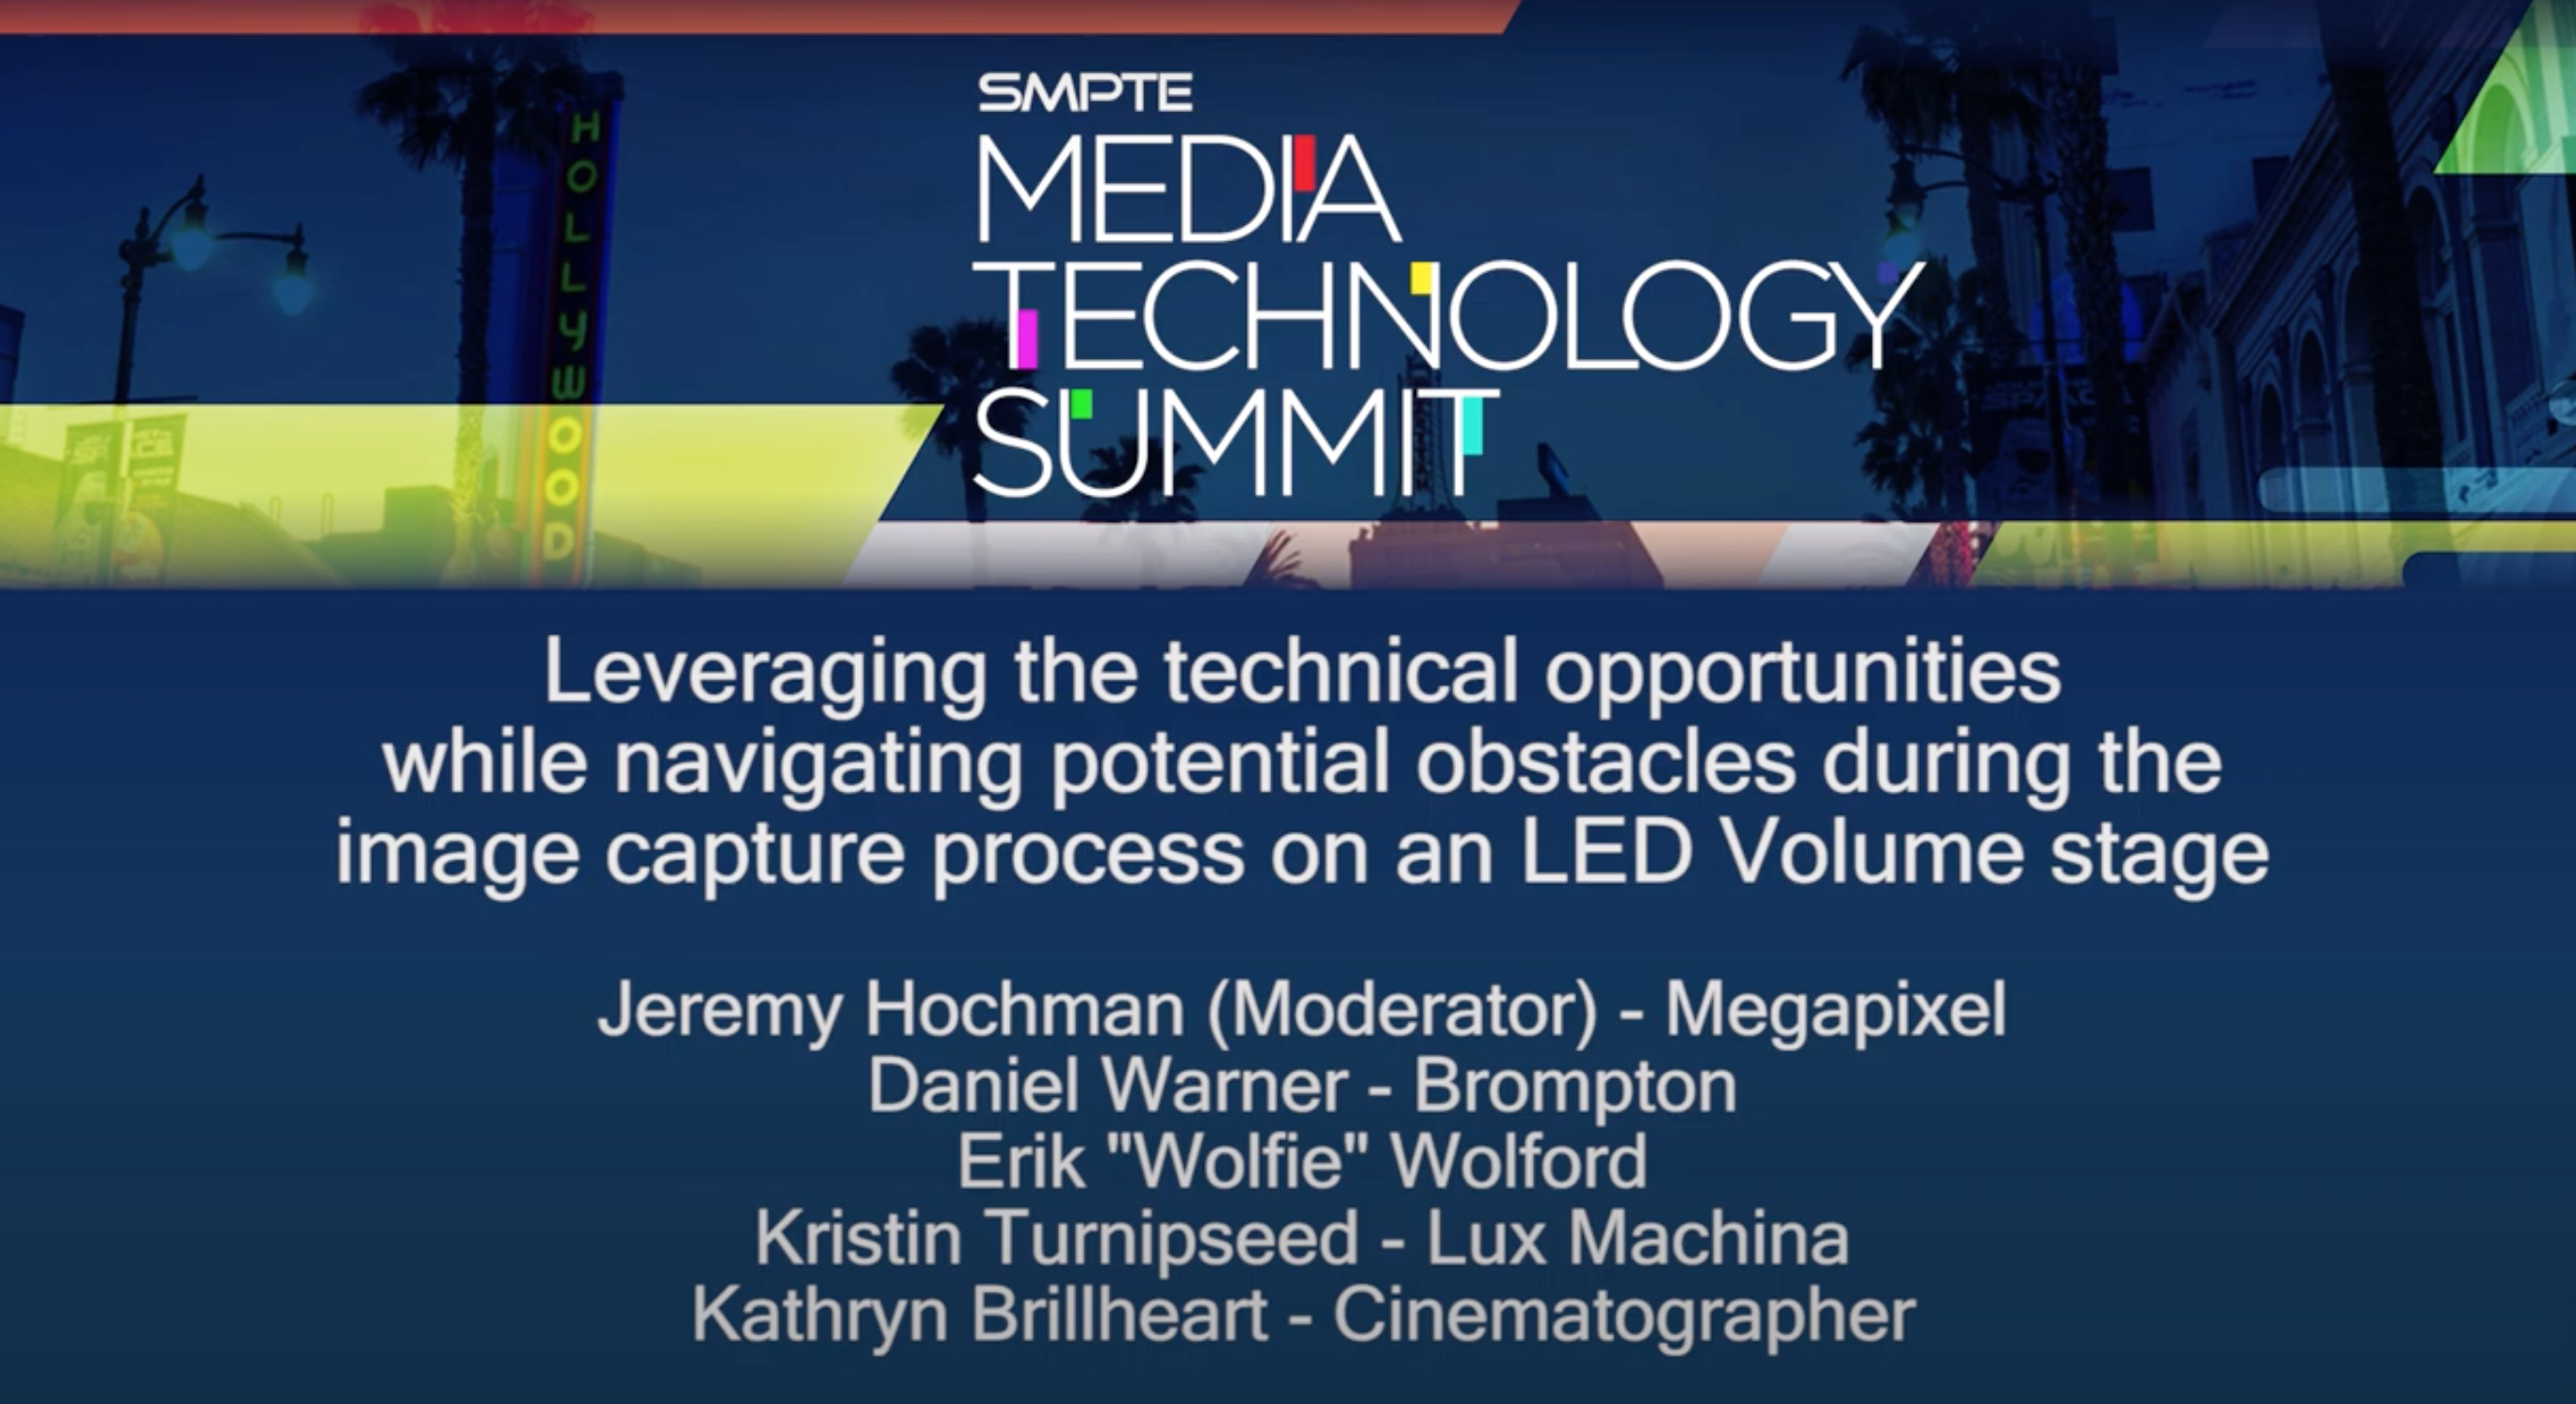 Leveraging the technical opportunities while navigating potential obstacles during the image capture process on an LED Volume Stage